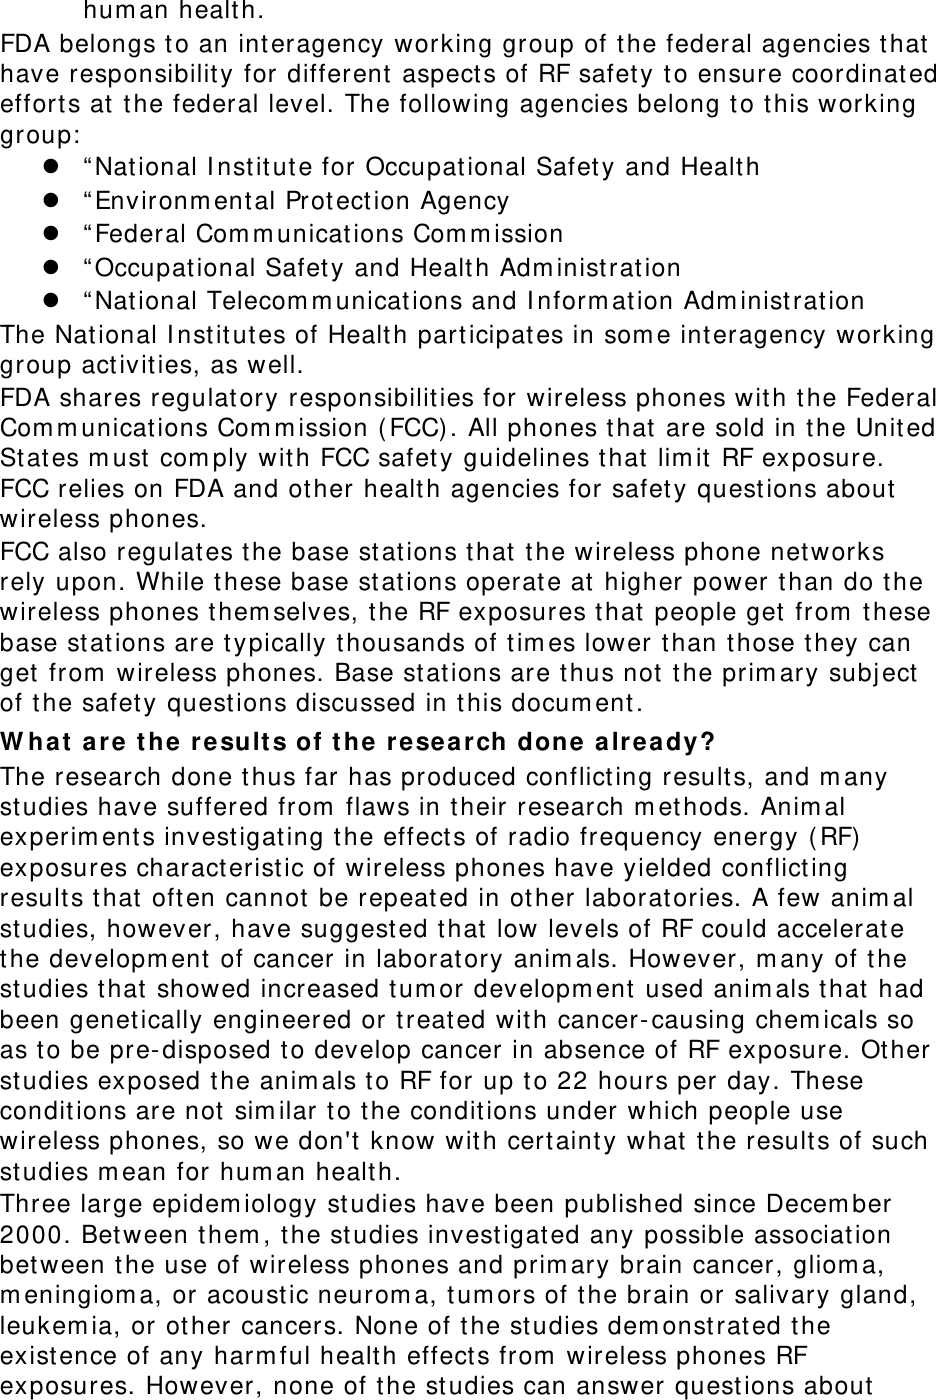 hum an healt h. FDA belongs t o an int eragency working group of the federal agencies that have responsibility for different  aspect s of RF safety t o ensure coordinated effort s at  t he federal level. The following agencies belong to this working group:  z “ Nat ional I nst itute for Occupat ional Safet y and Healt h z “ Environm ent al Prot ection Agency z “ Federal Com m unications Com m ission z “ Occupat ional Safet y and Health Adm inistrat ion z “ Nat ional Telecom m unications and I nform at ion Adm inist rat ion The Nat ional I nstit utes of Healt h part icipat es in som e int eragency working group act ivities, as well. FDA shares regulat ory responsibilities for wireless phones wit h the Federal Com m unications Com m ission ( FCC) . All phones that are sold in t he Unit ed St ates m ust  com ply wit h FCC safet y guidelines that lim it  RF exposure. FCC relies on FDA and other healt h agencies for safet y questions about wireless phones. FCC also regulates the base stations t hat t he wireless phone networks rely upon. While t hese base st at ions operate at  higher power than do the wireless phones t hem selves, the RF exposures that people get  from  these base st at ions are t ypically t housands of tim es lower than those they can get from  wireless phones. Base st at ions are t hus not t he prim ary subj ect  of the safet y questions discussed in this docum ent . W ha t ar e the r esult s of t he re search done a lready? The research done t hus far has produced conflicting result s, and m any studies have suffered from  flaws in t heir research m et hods. Anim al experim ents invest igating the effects of radio frequency energy ( RF)  exposures charact erist ic of wireless phones have yielded conflict ing results that oft en cannot  be repeated in ot her laborat ories. A few anim al studies, however, have suggest ed t hat  low levels of RF could accelerat e the developm ent of cancer in laboratory anim als. However, m any of t he studies that showed increased tum or developm ent  used anim als that had been genet ically engineered or t reat ed wit h cancer- causing chem icals so as to be pre-disposed to develop cancer in absence of RF exposure. Ot her studies exposed the anim als t o RF for up t o 22 hours per day. These condit ions are not sim ilar t o the conditions under which people use wireless phones, so we don&apos;t know wit h cert aint y what  t he result s of such studies m ean for hum an healt h. Three large epidem iology st udies have been published since Decem ber 2000. Between them , the studies investigat ed any possible associat ion between the use of wireless phones and prim ary brain cancer, gliom a, m eningiom a, or acoust ic neurom a, t um ors of t he brain or salivary gland, leukem ia, or other cancers. None of t he studies dem onst rated the exist ence of any harm ful healt h effects from  wireless phones RF exposures. However, none of the studies can answer quest ions about 